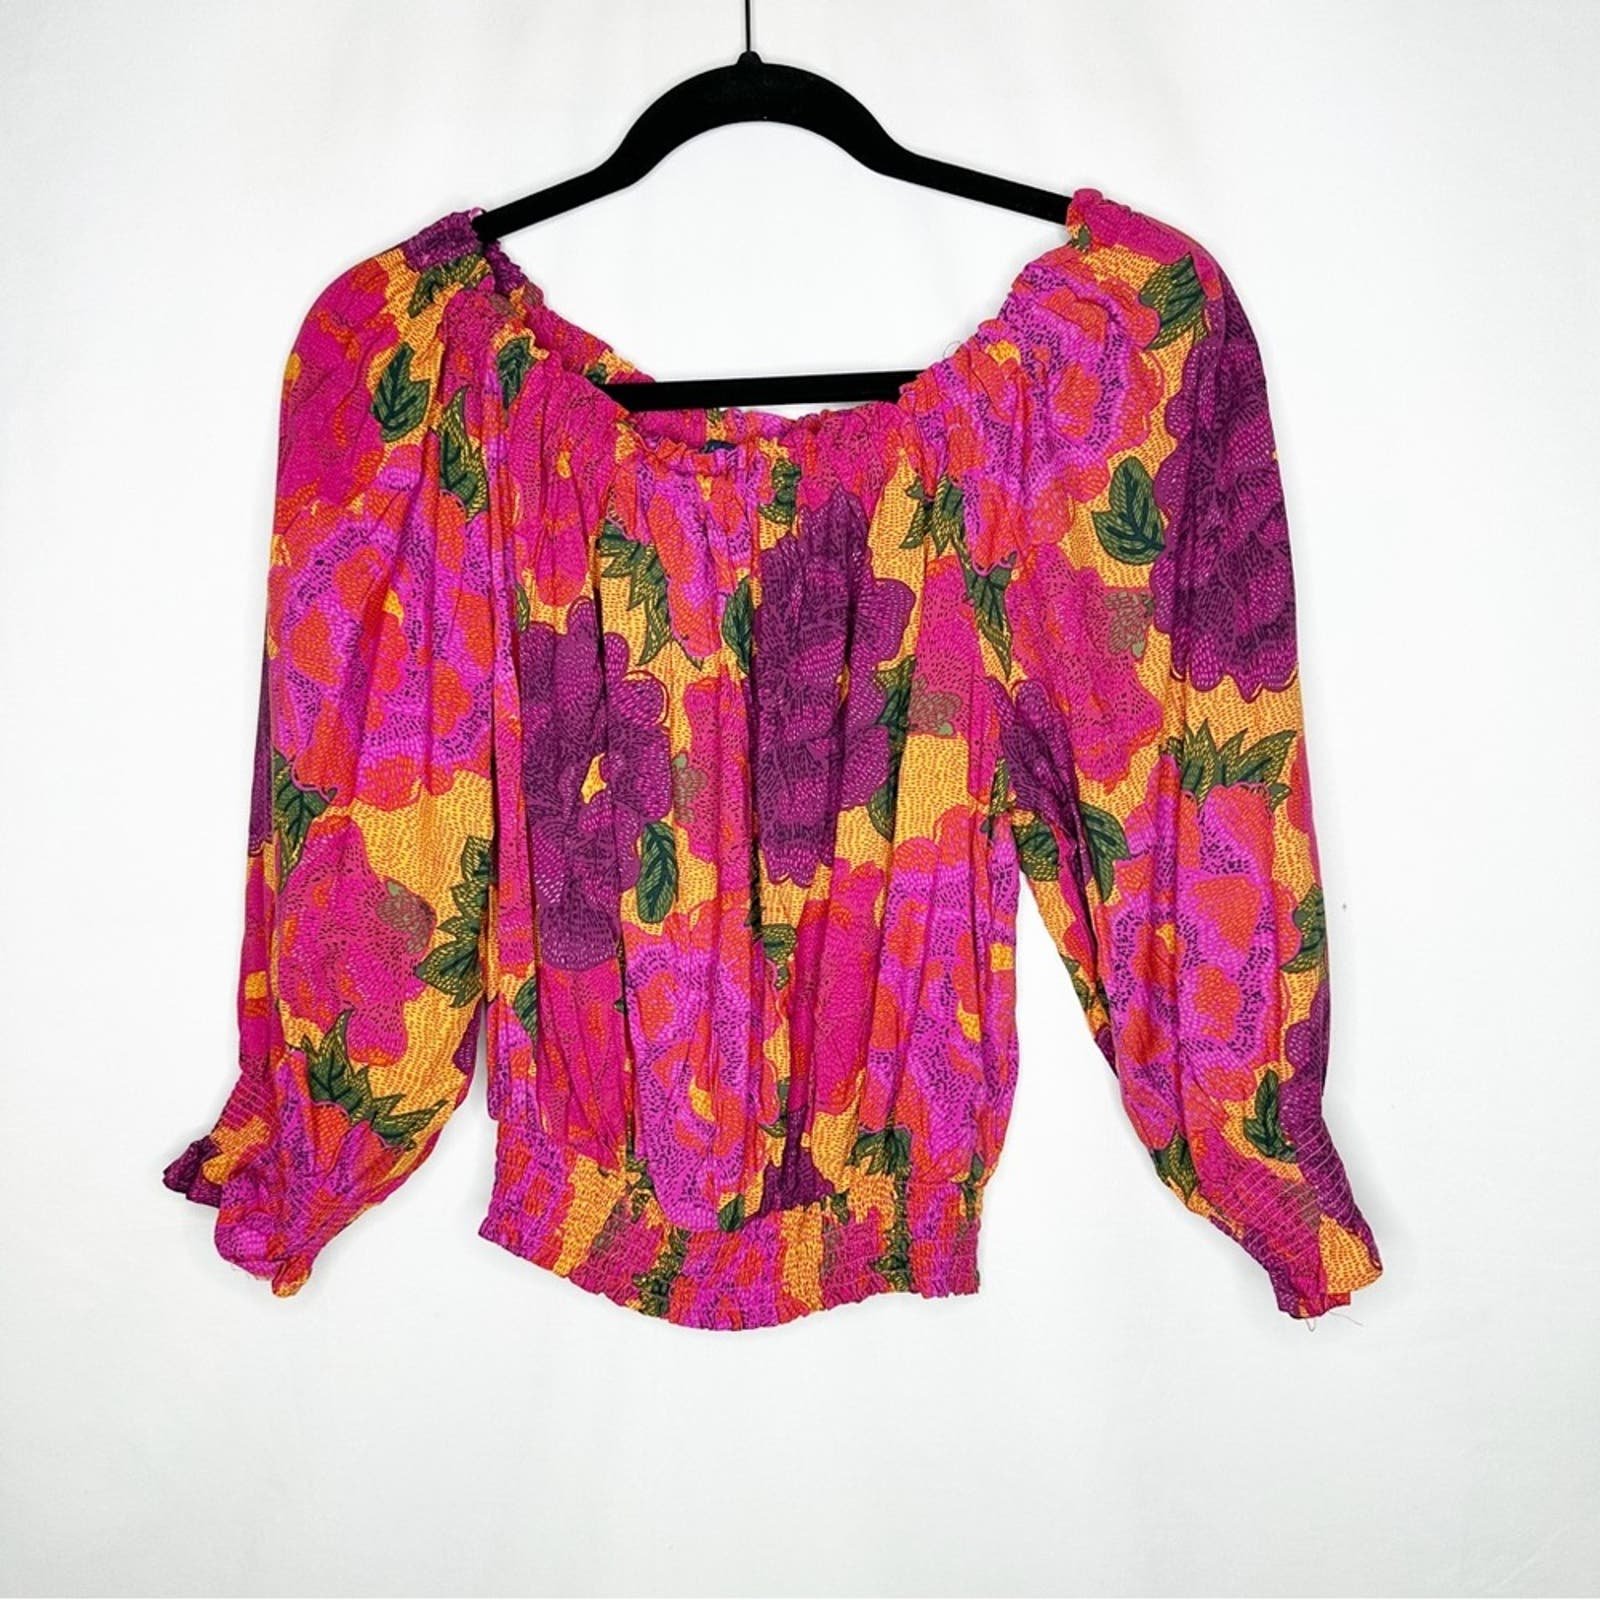 cheapest place to buy  RACHEL ROY Floral Blouse NWT in 